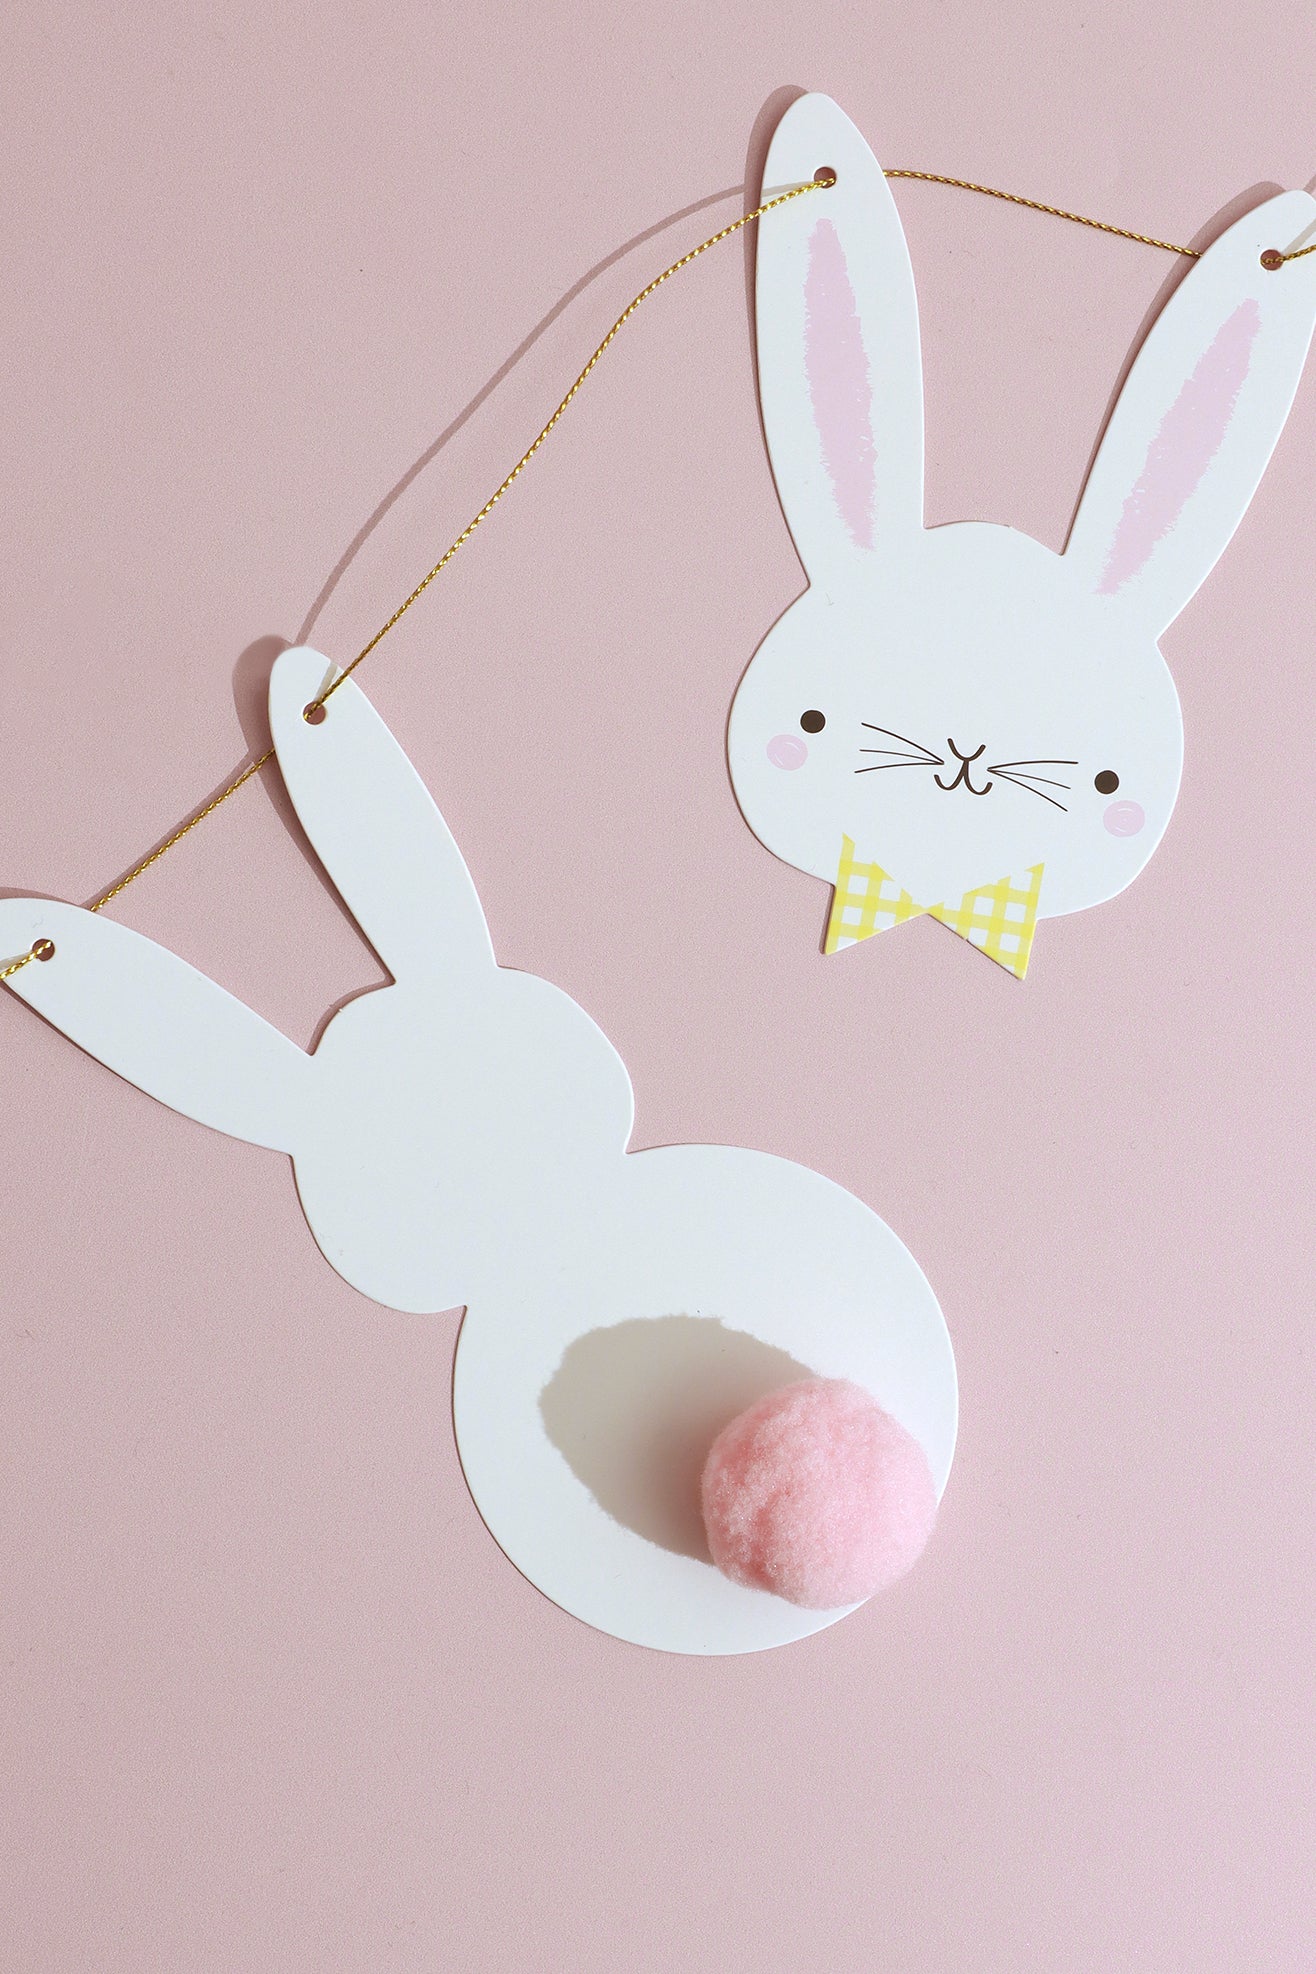 Bunny Bunting with White Rabbit Faces and Silhouettes with Pom Pom Tails